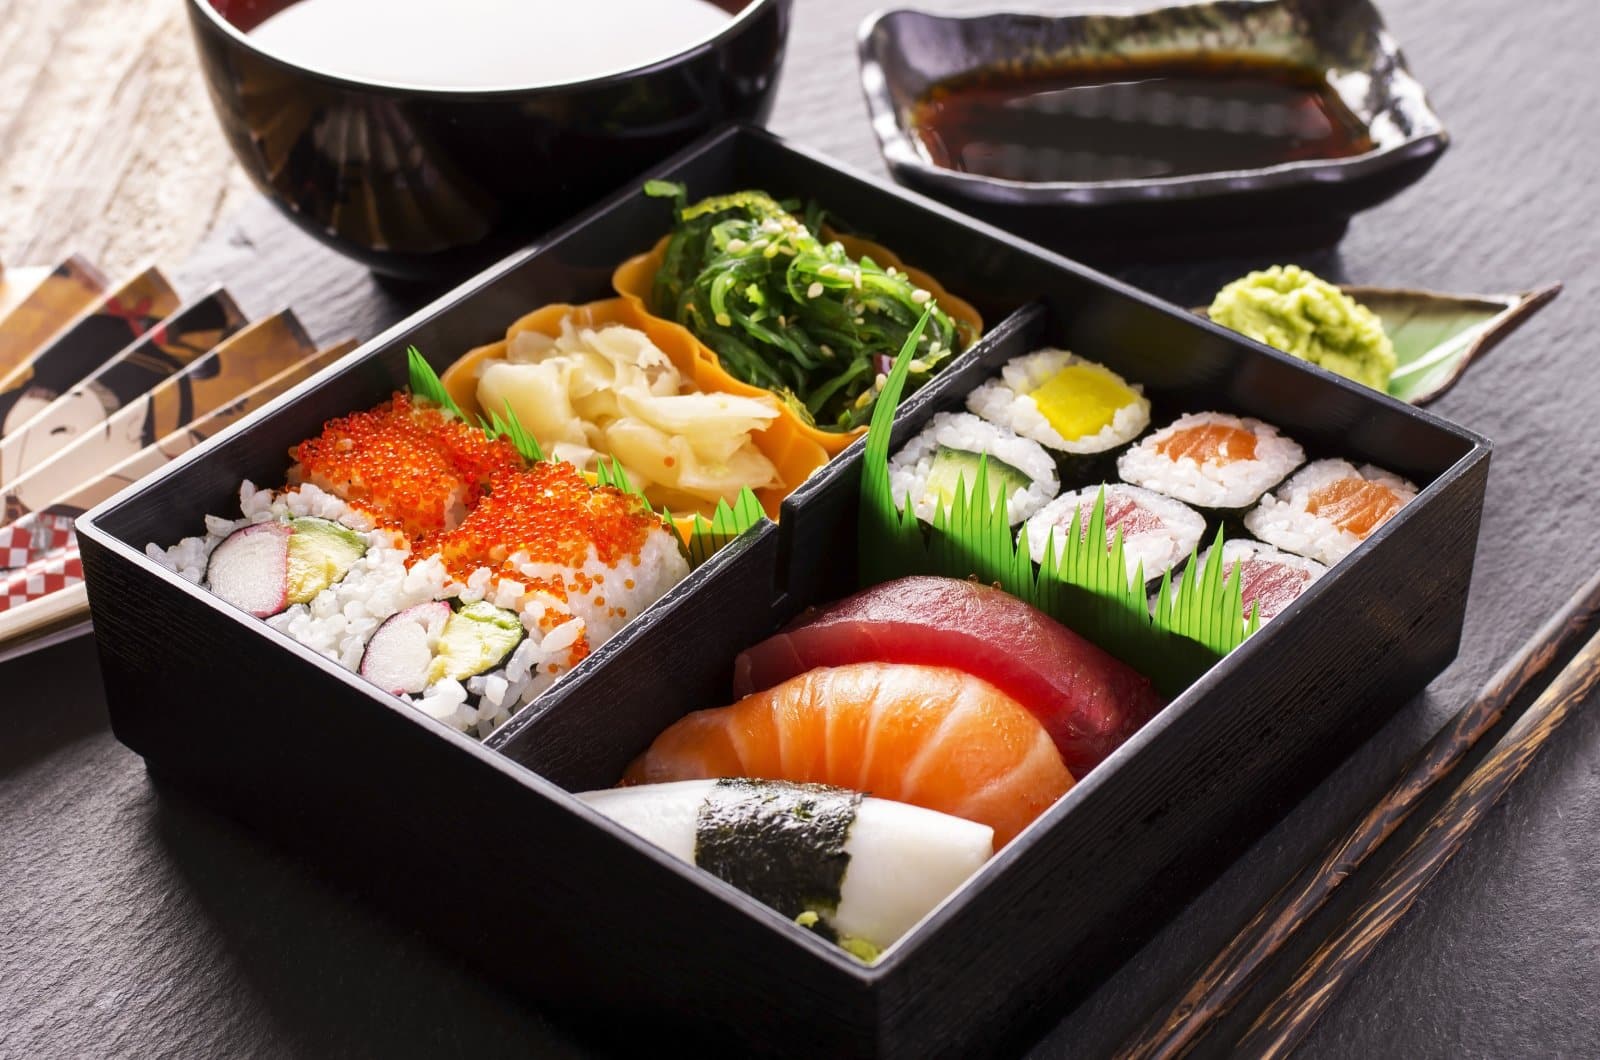 <p class="wp-caption-text">Image Credit: Shutterstock / hlphoto</p>  <p>Tokyo offers sushi aficionados conveyor belt restaurants where plates start at around 100 yen ($0.90) each. Contrast this with the average sushi roll in an American sushi bar, which can cost $6-$8, and Tokyo’s offering is a clear winner for your palate and pocket.</p>